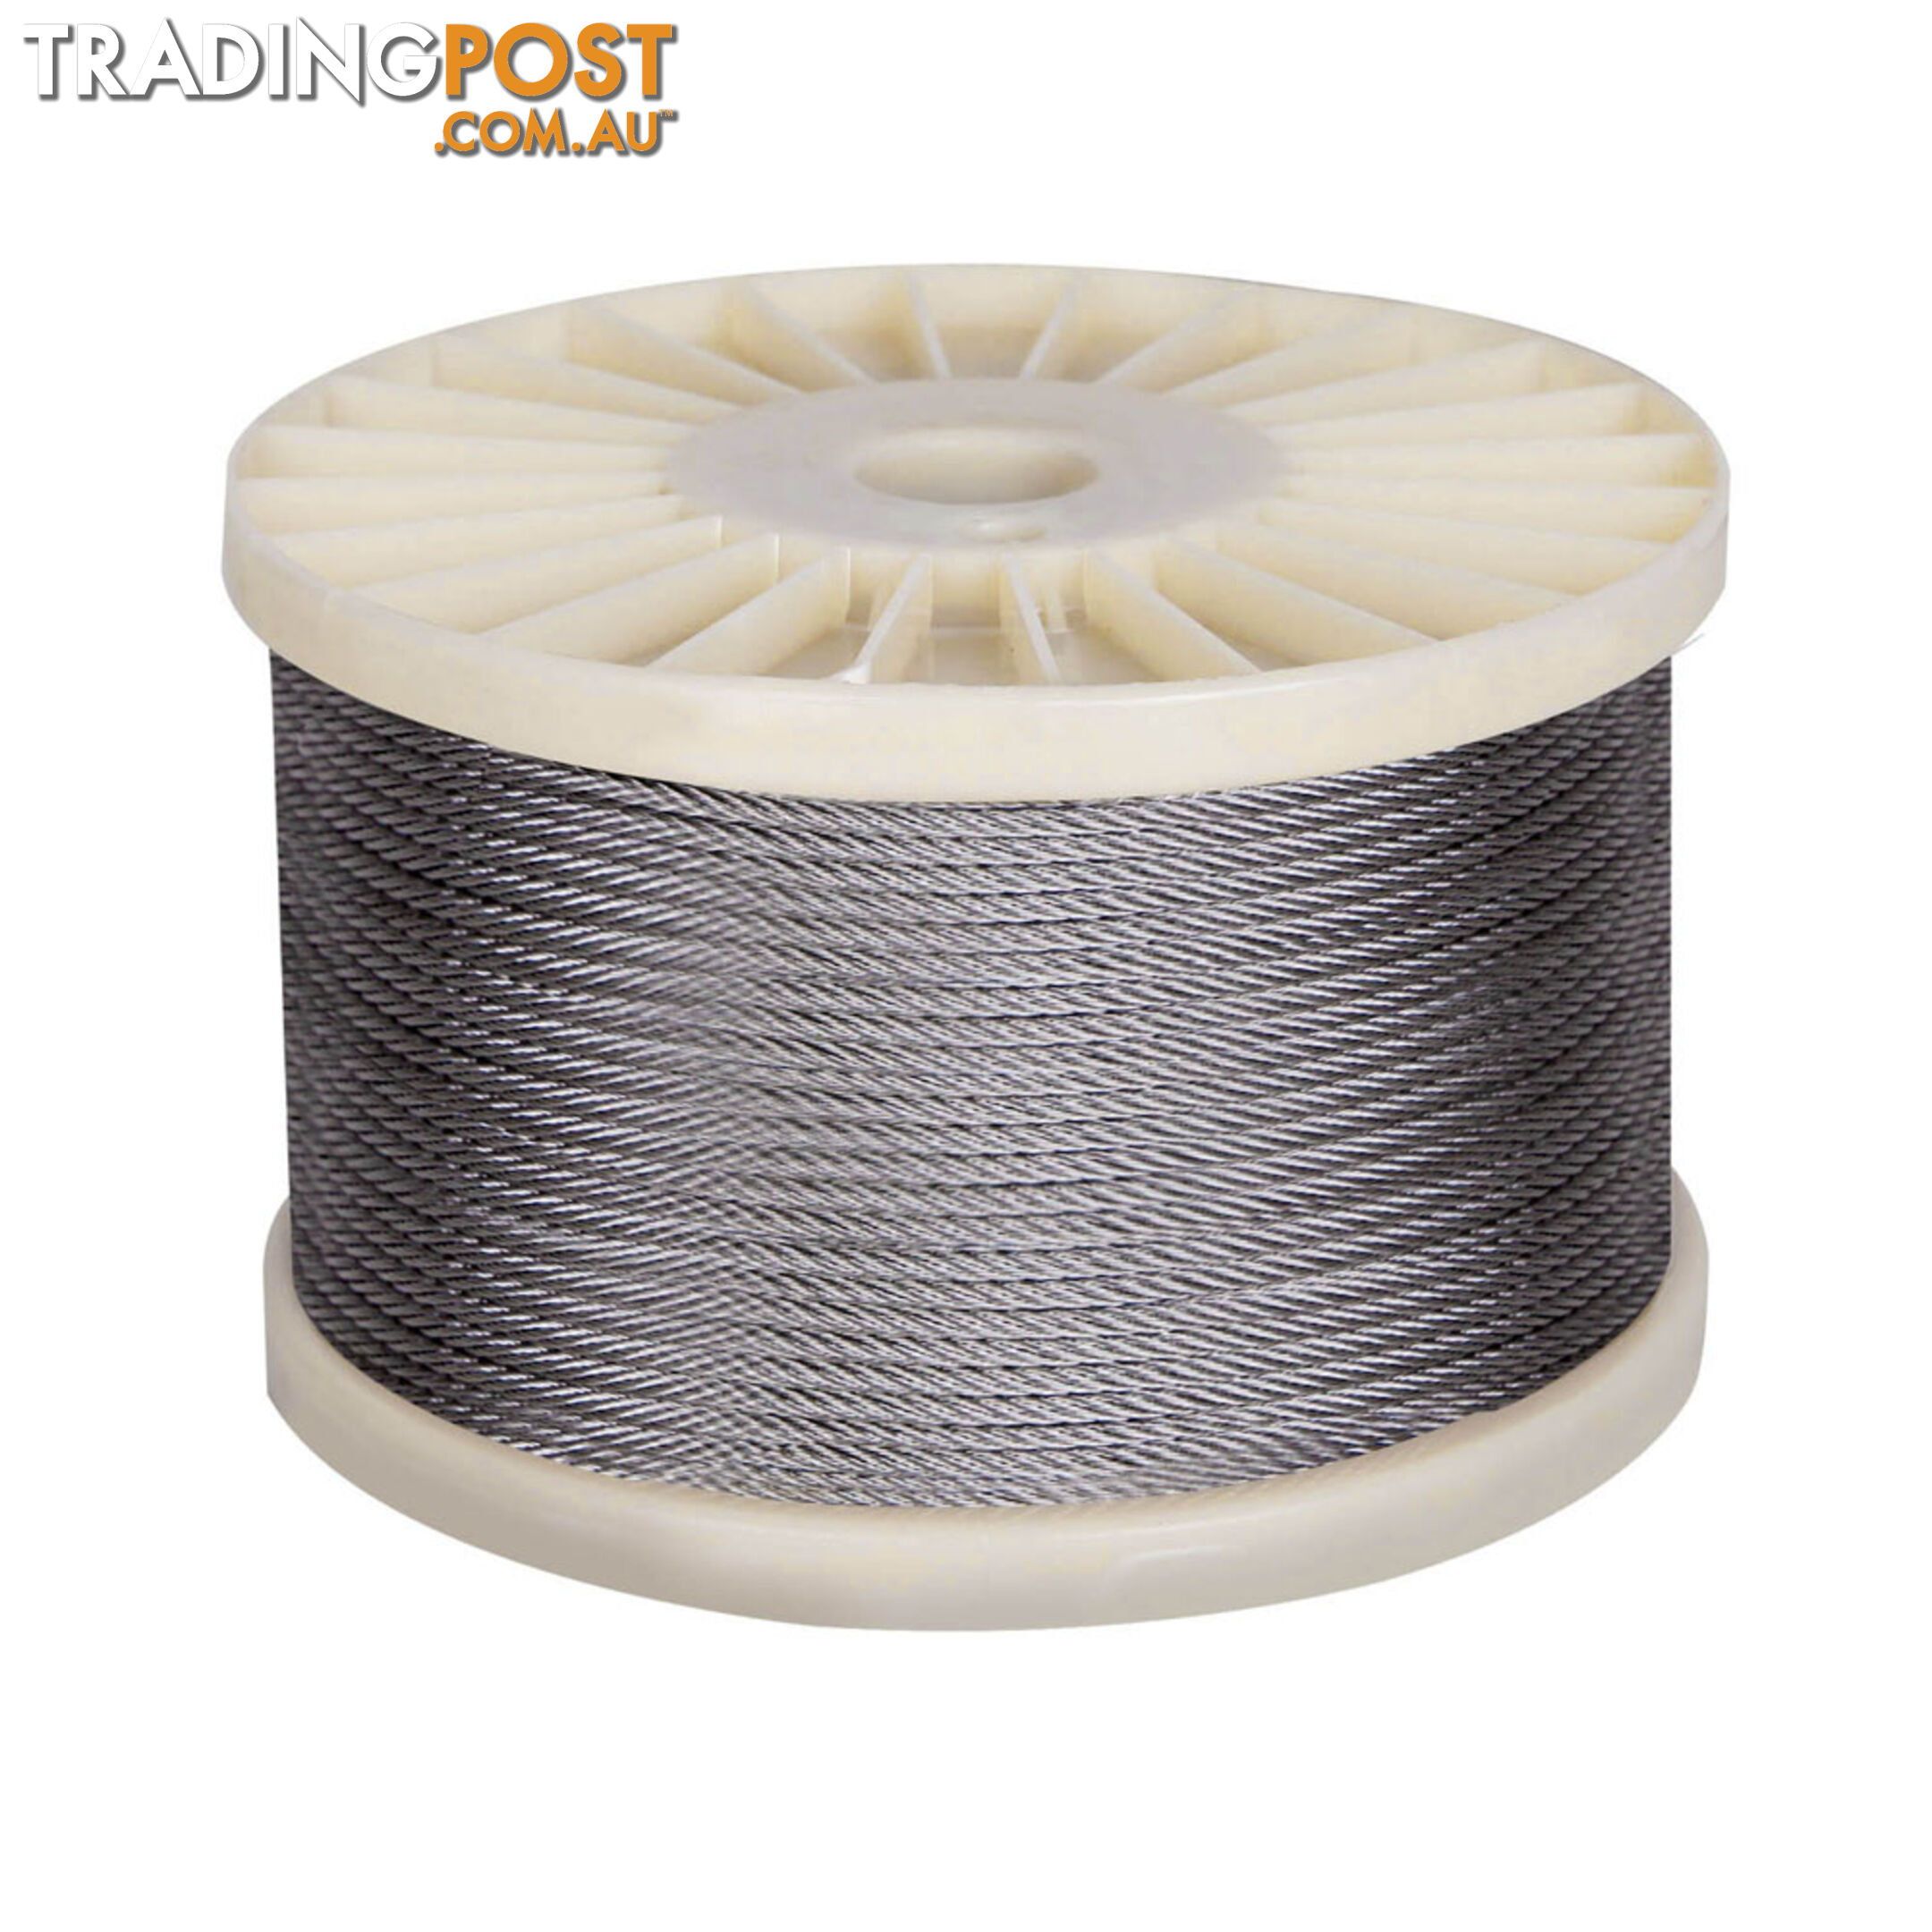 7x 7 Marine Stainless Steel Wire Rope 305M